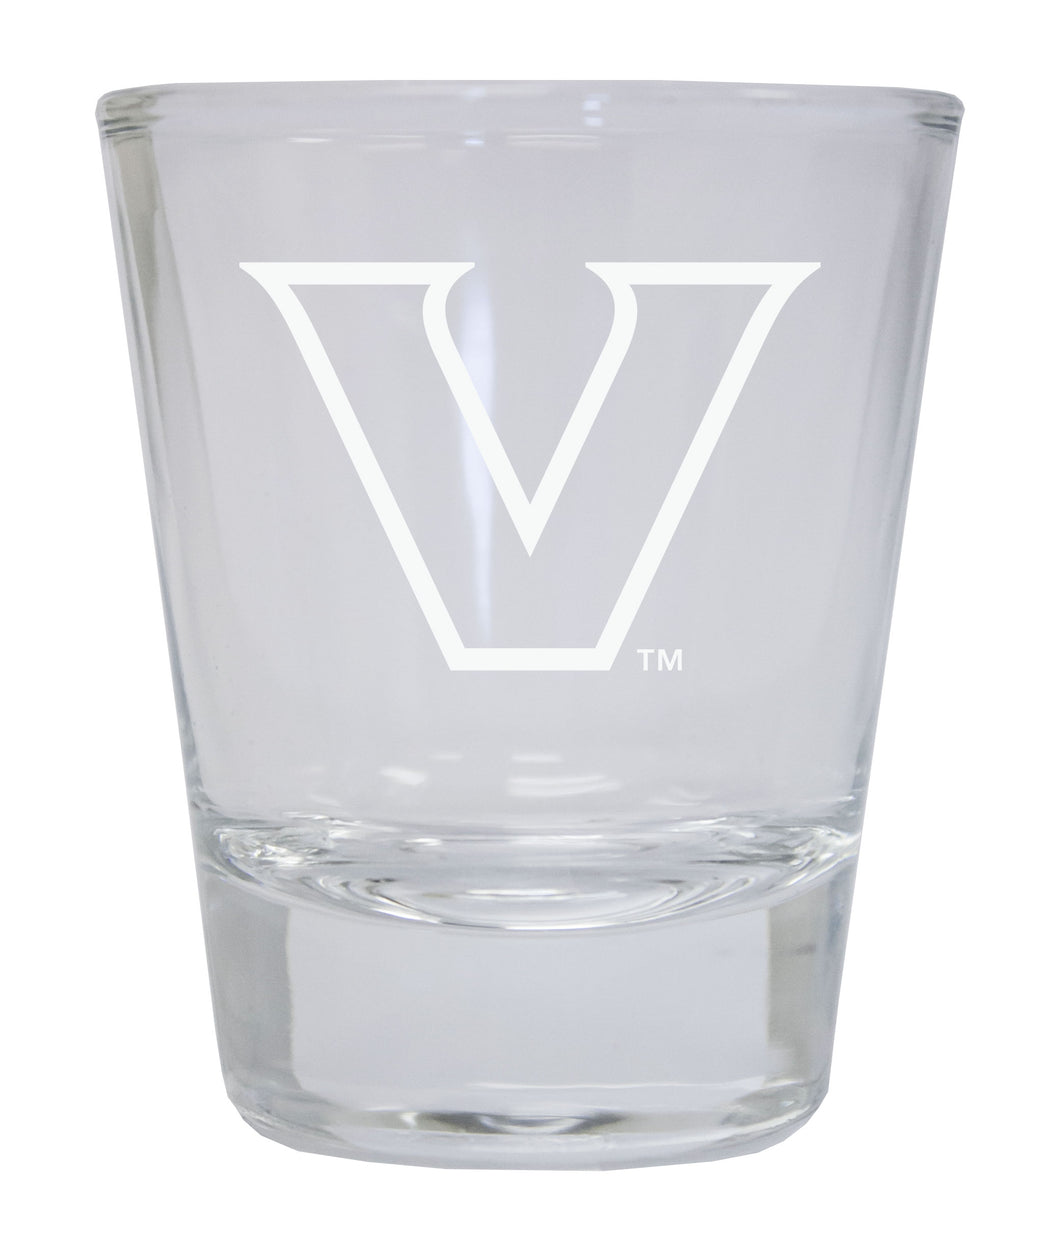 Vanderbilt University Etched Round Shot Glass Officially Licensed Collegiate Product